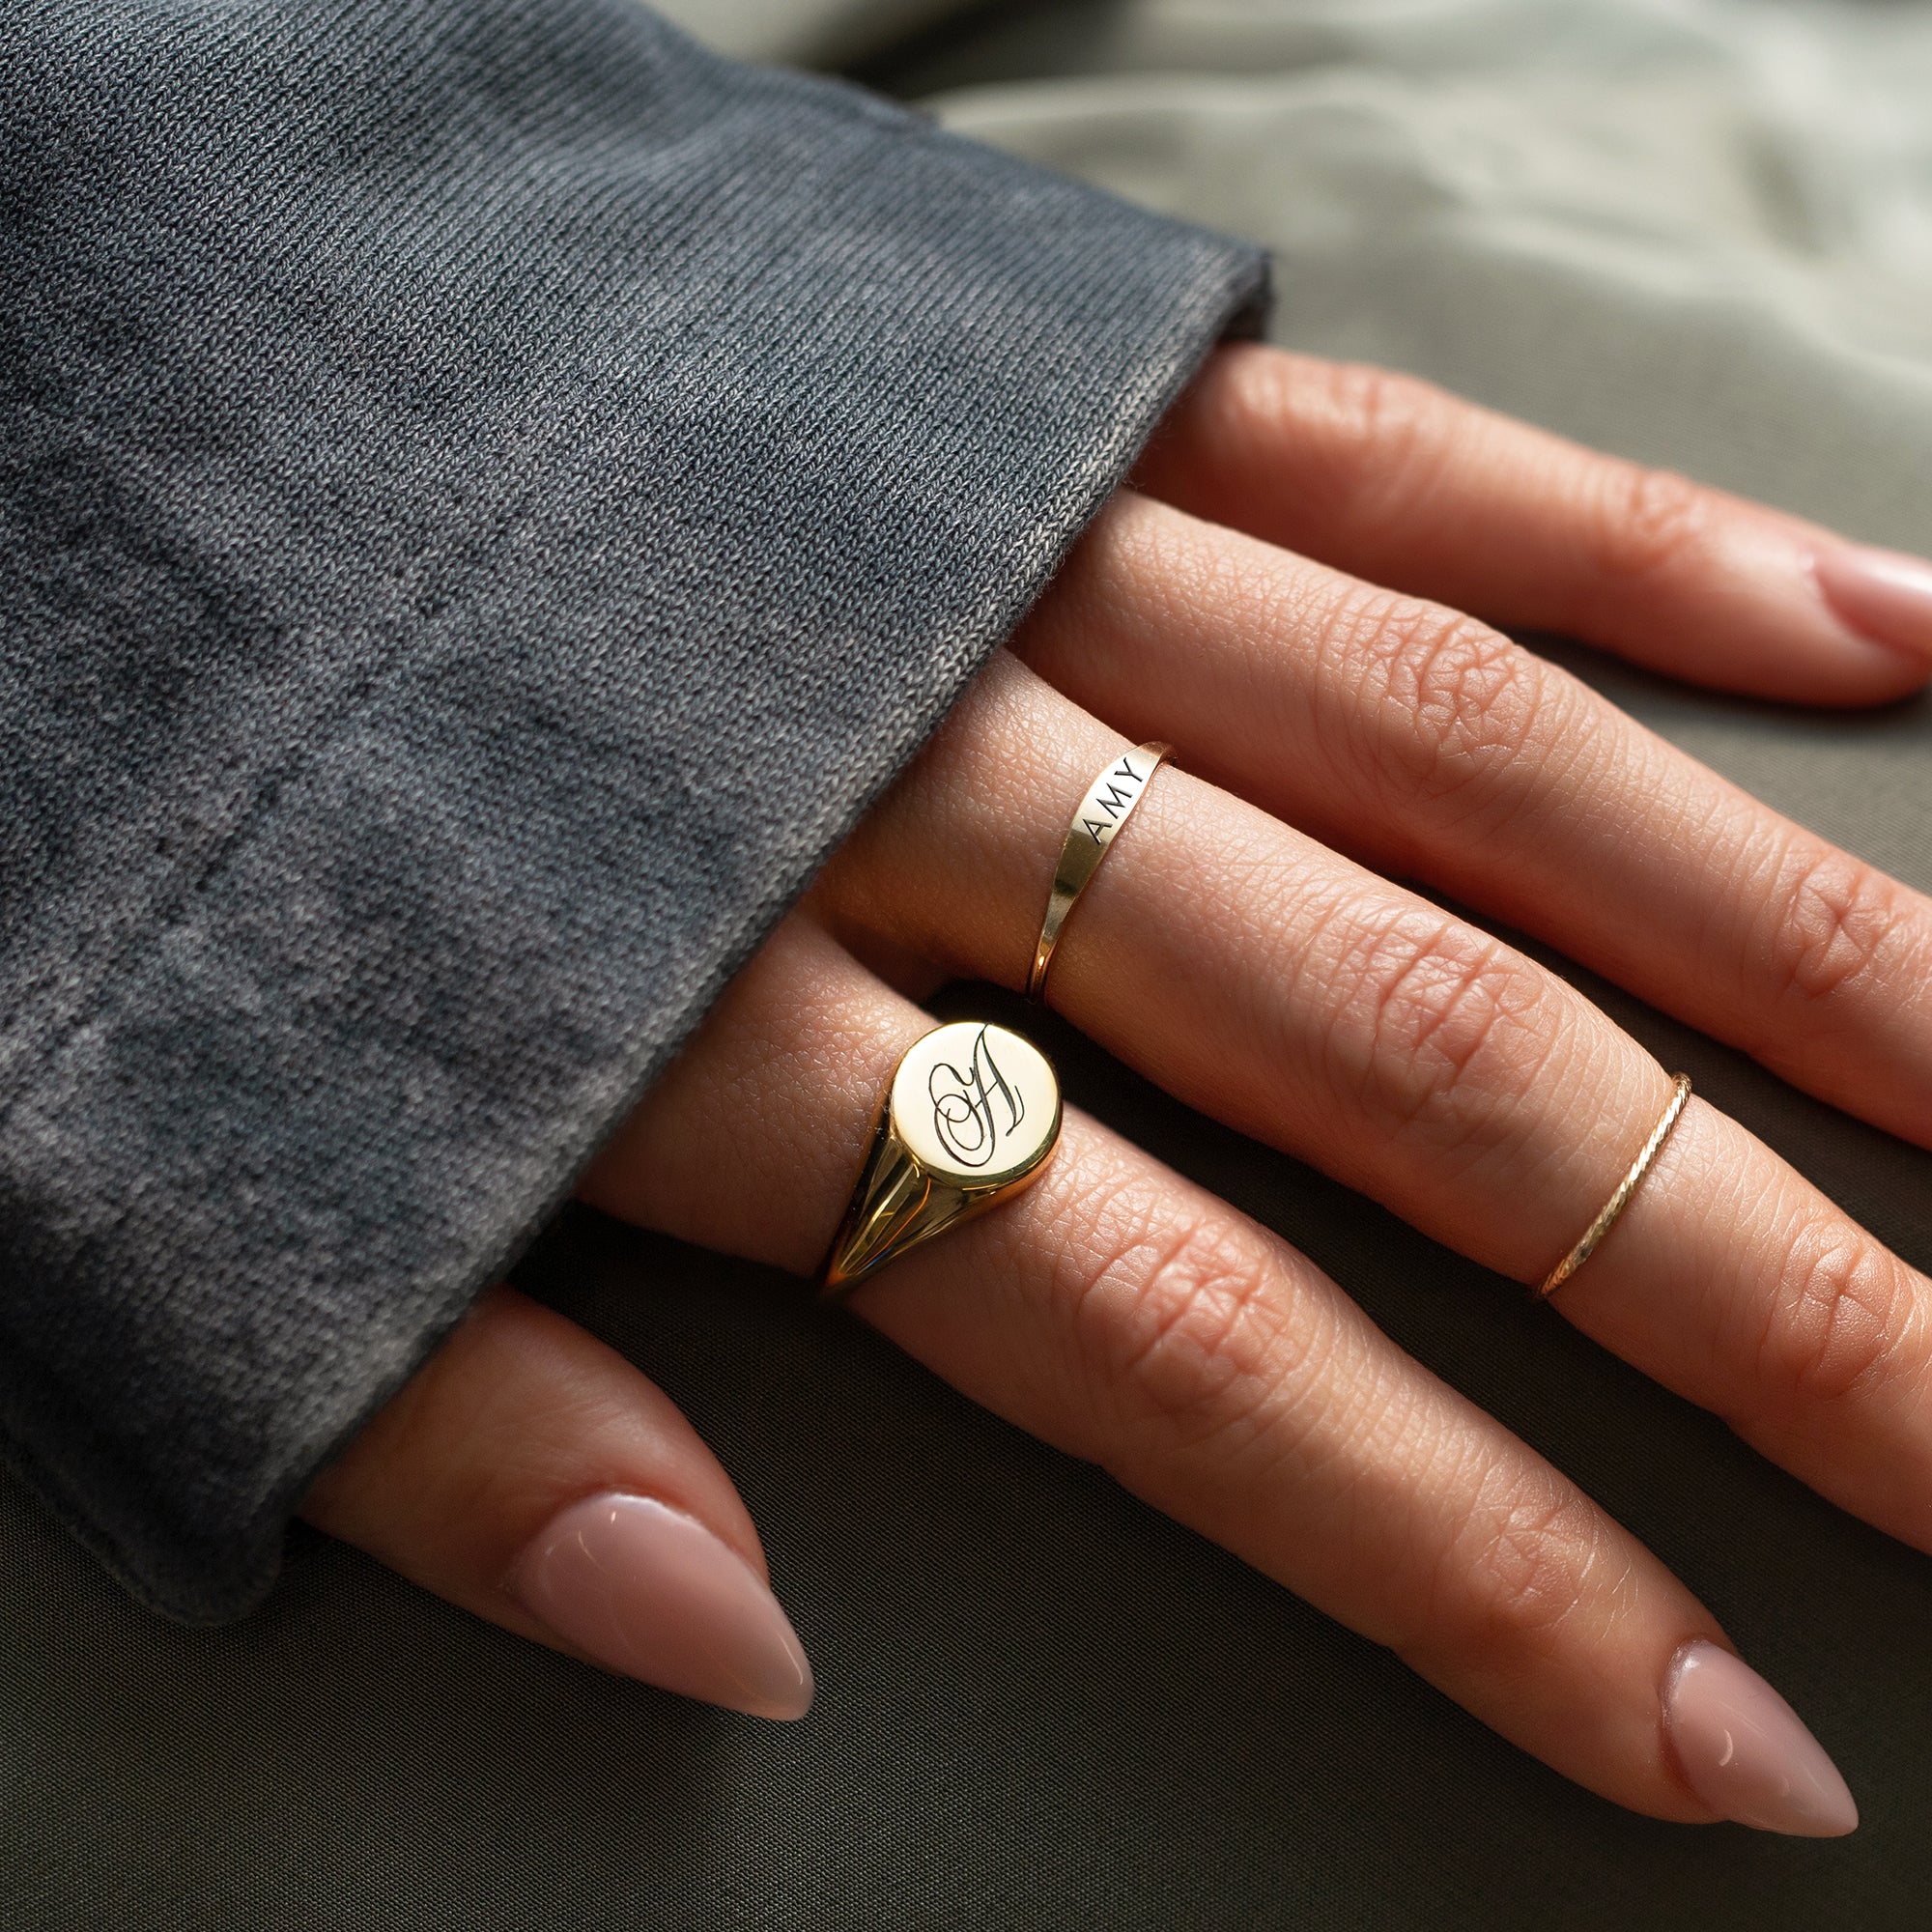 Thin Signet Engraved Ring